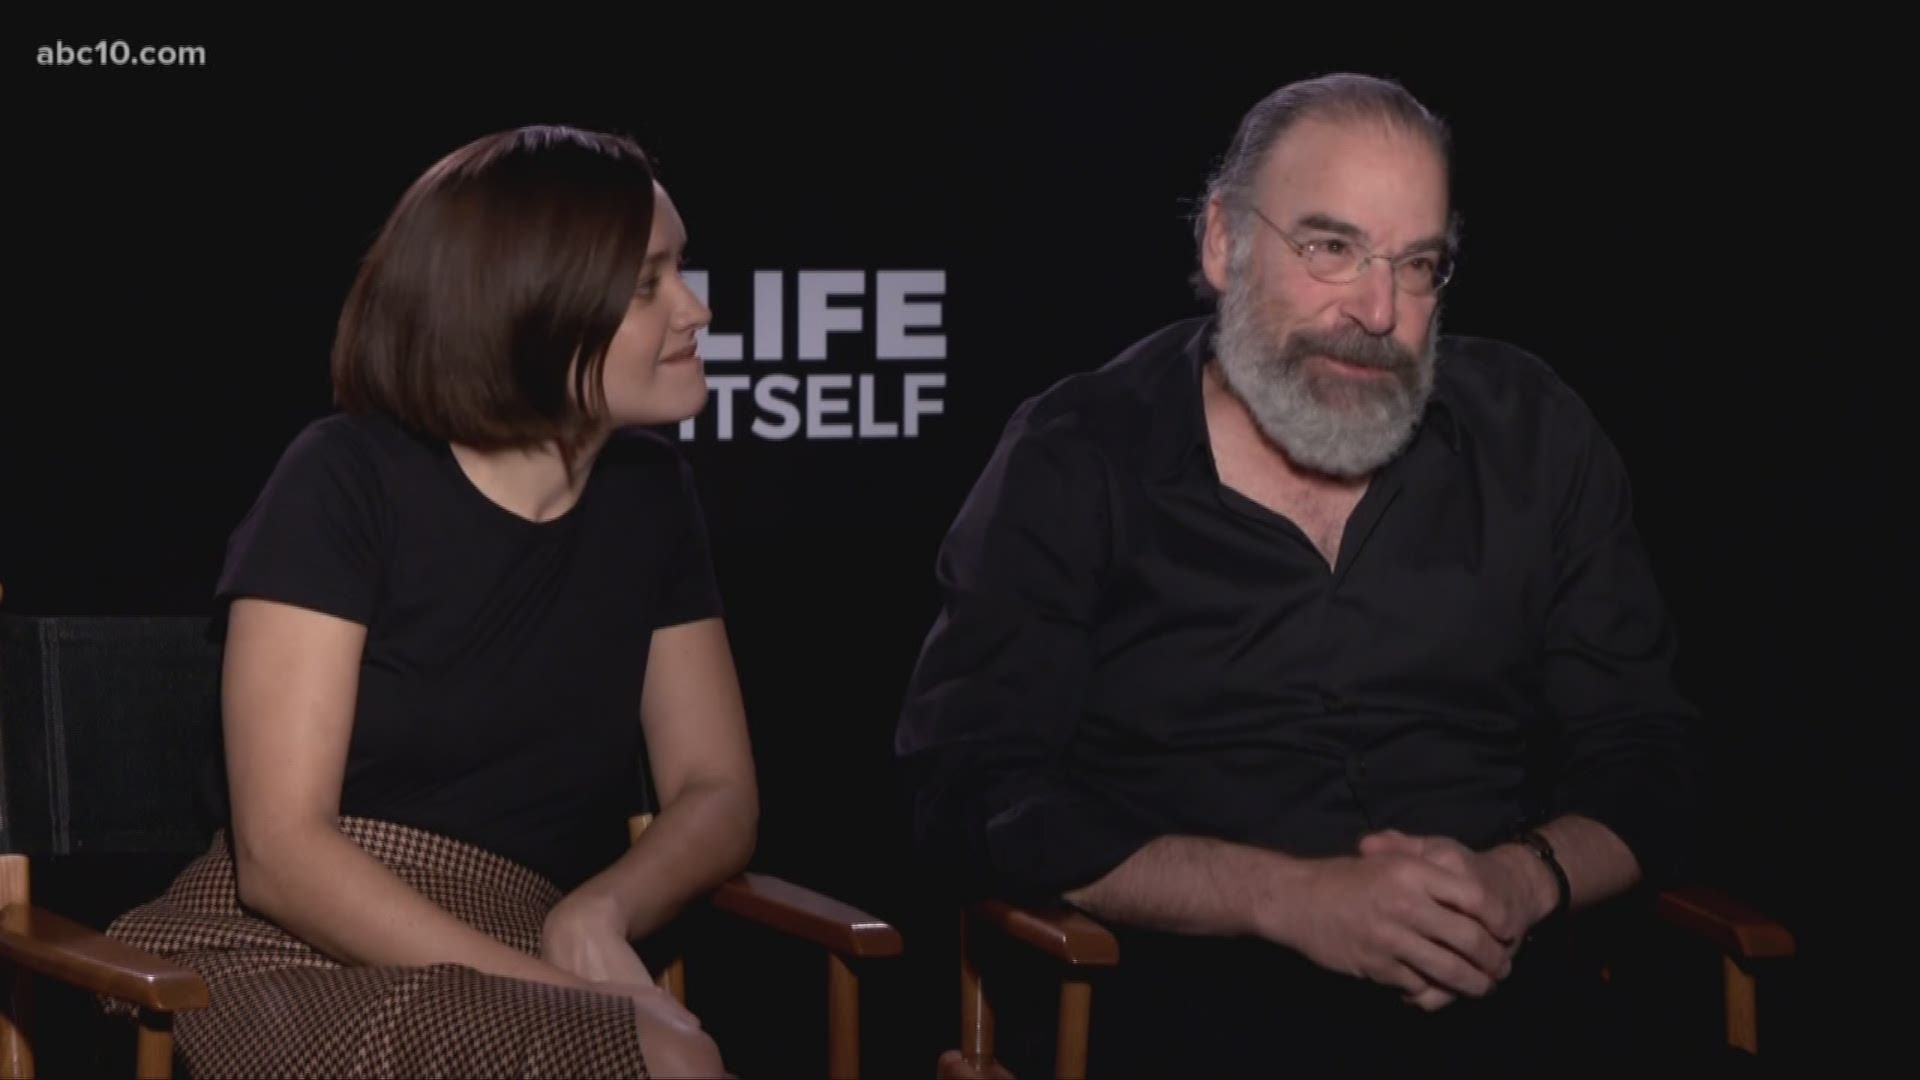 Mark S. Allen sat down with Olivia Cooke and Mandy Patinkin to talk about their new movie "Life Actually."